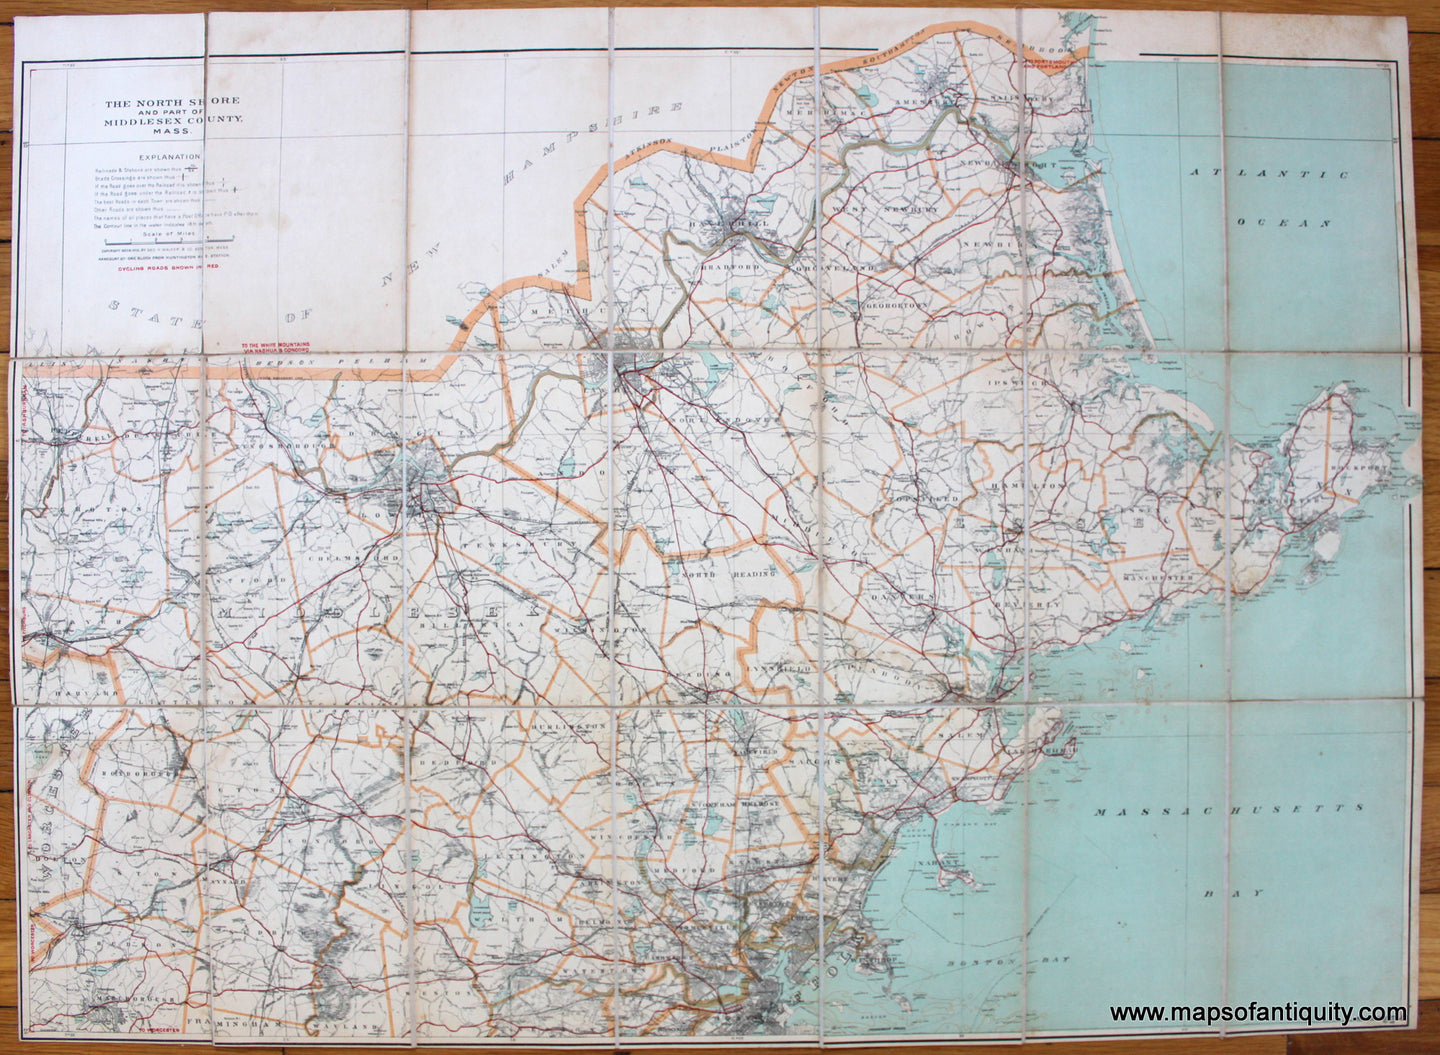 Antique-Folding-Map-Cyclist's-Road-Map-of-the-North-Shore-and-part-of-Middlesex-County-Massachusetts.-US-Massachusetts-Essex-County-1902-Walker-Maps-Of-Antiquity